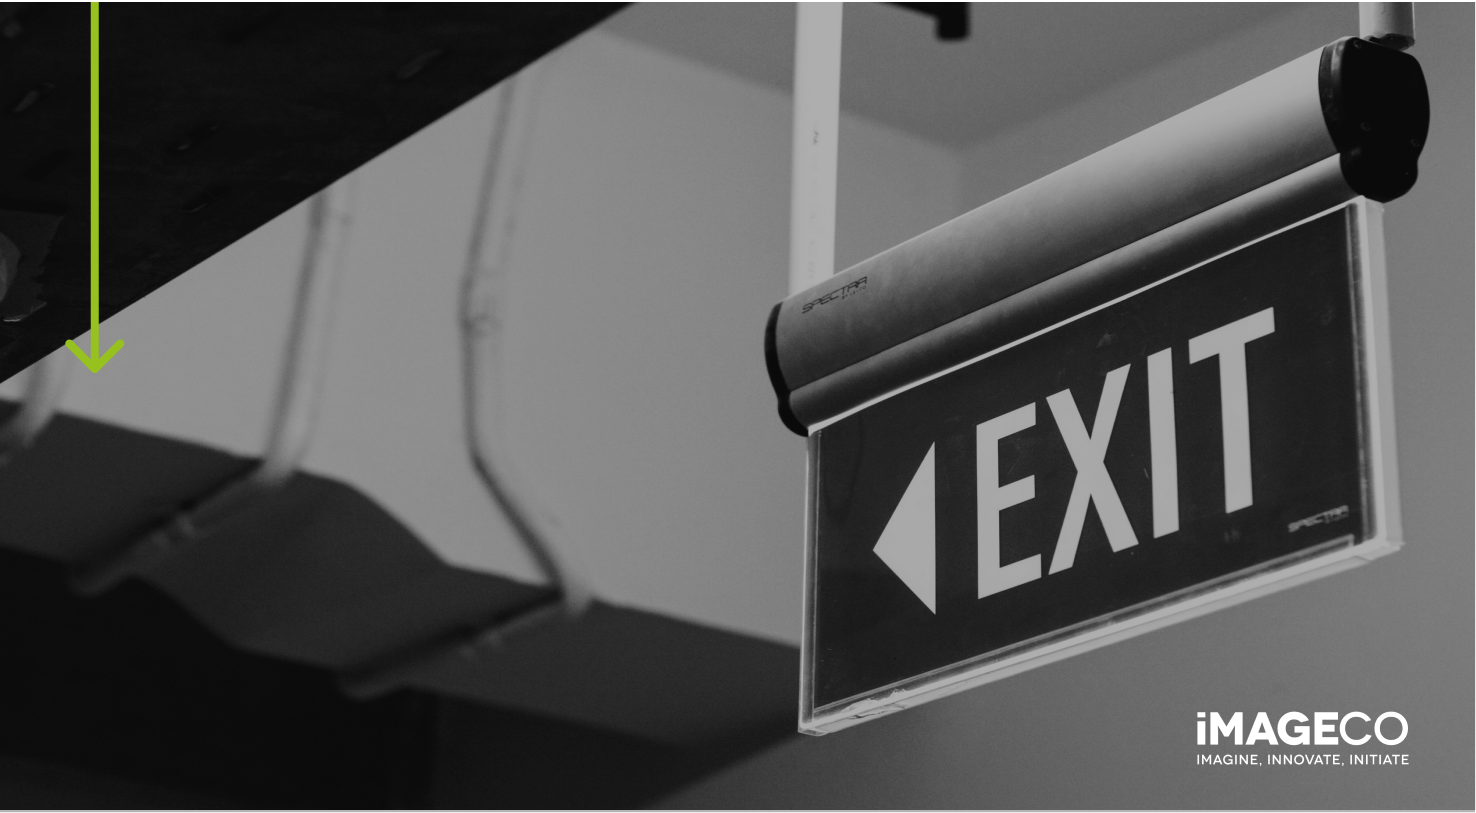 Picture of a exit sign in black and white